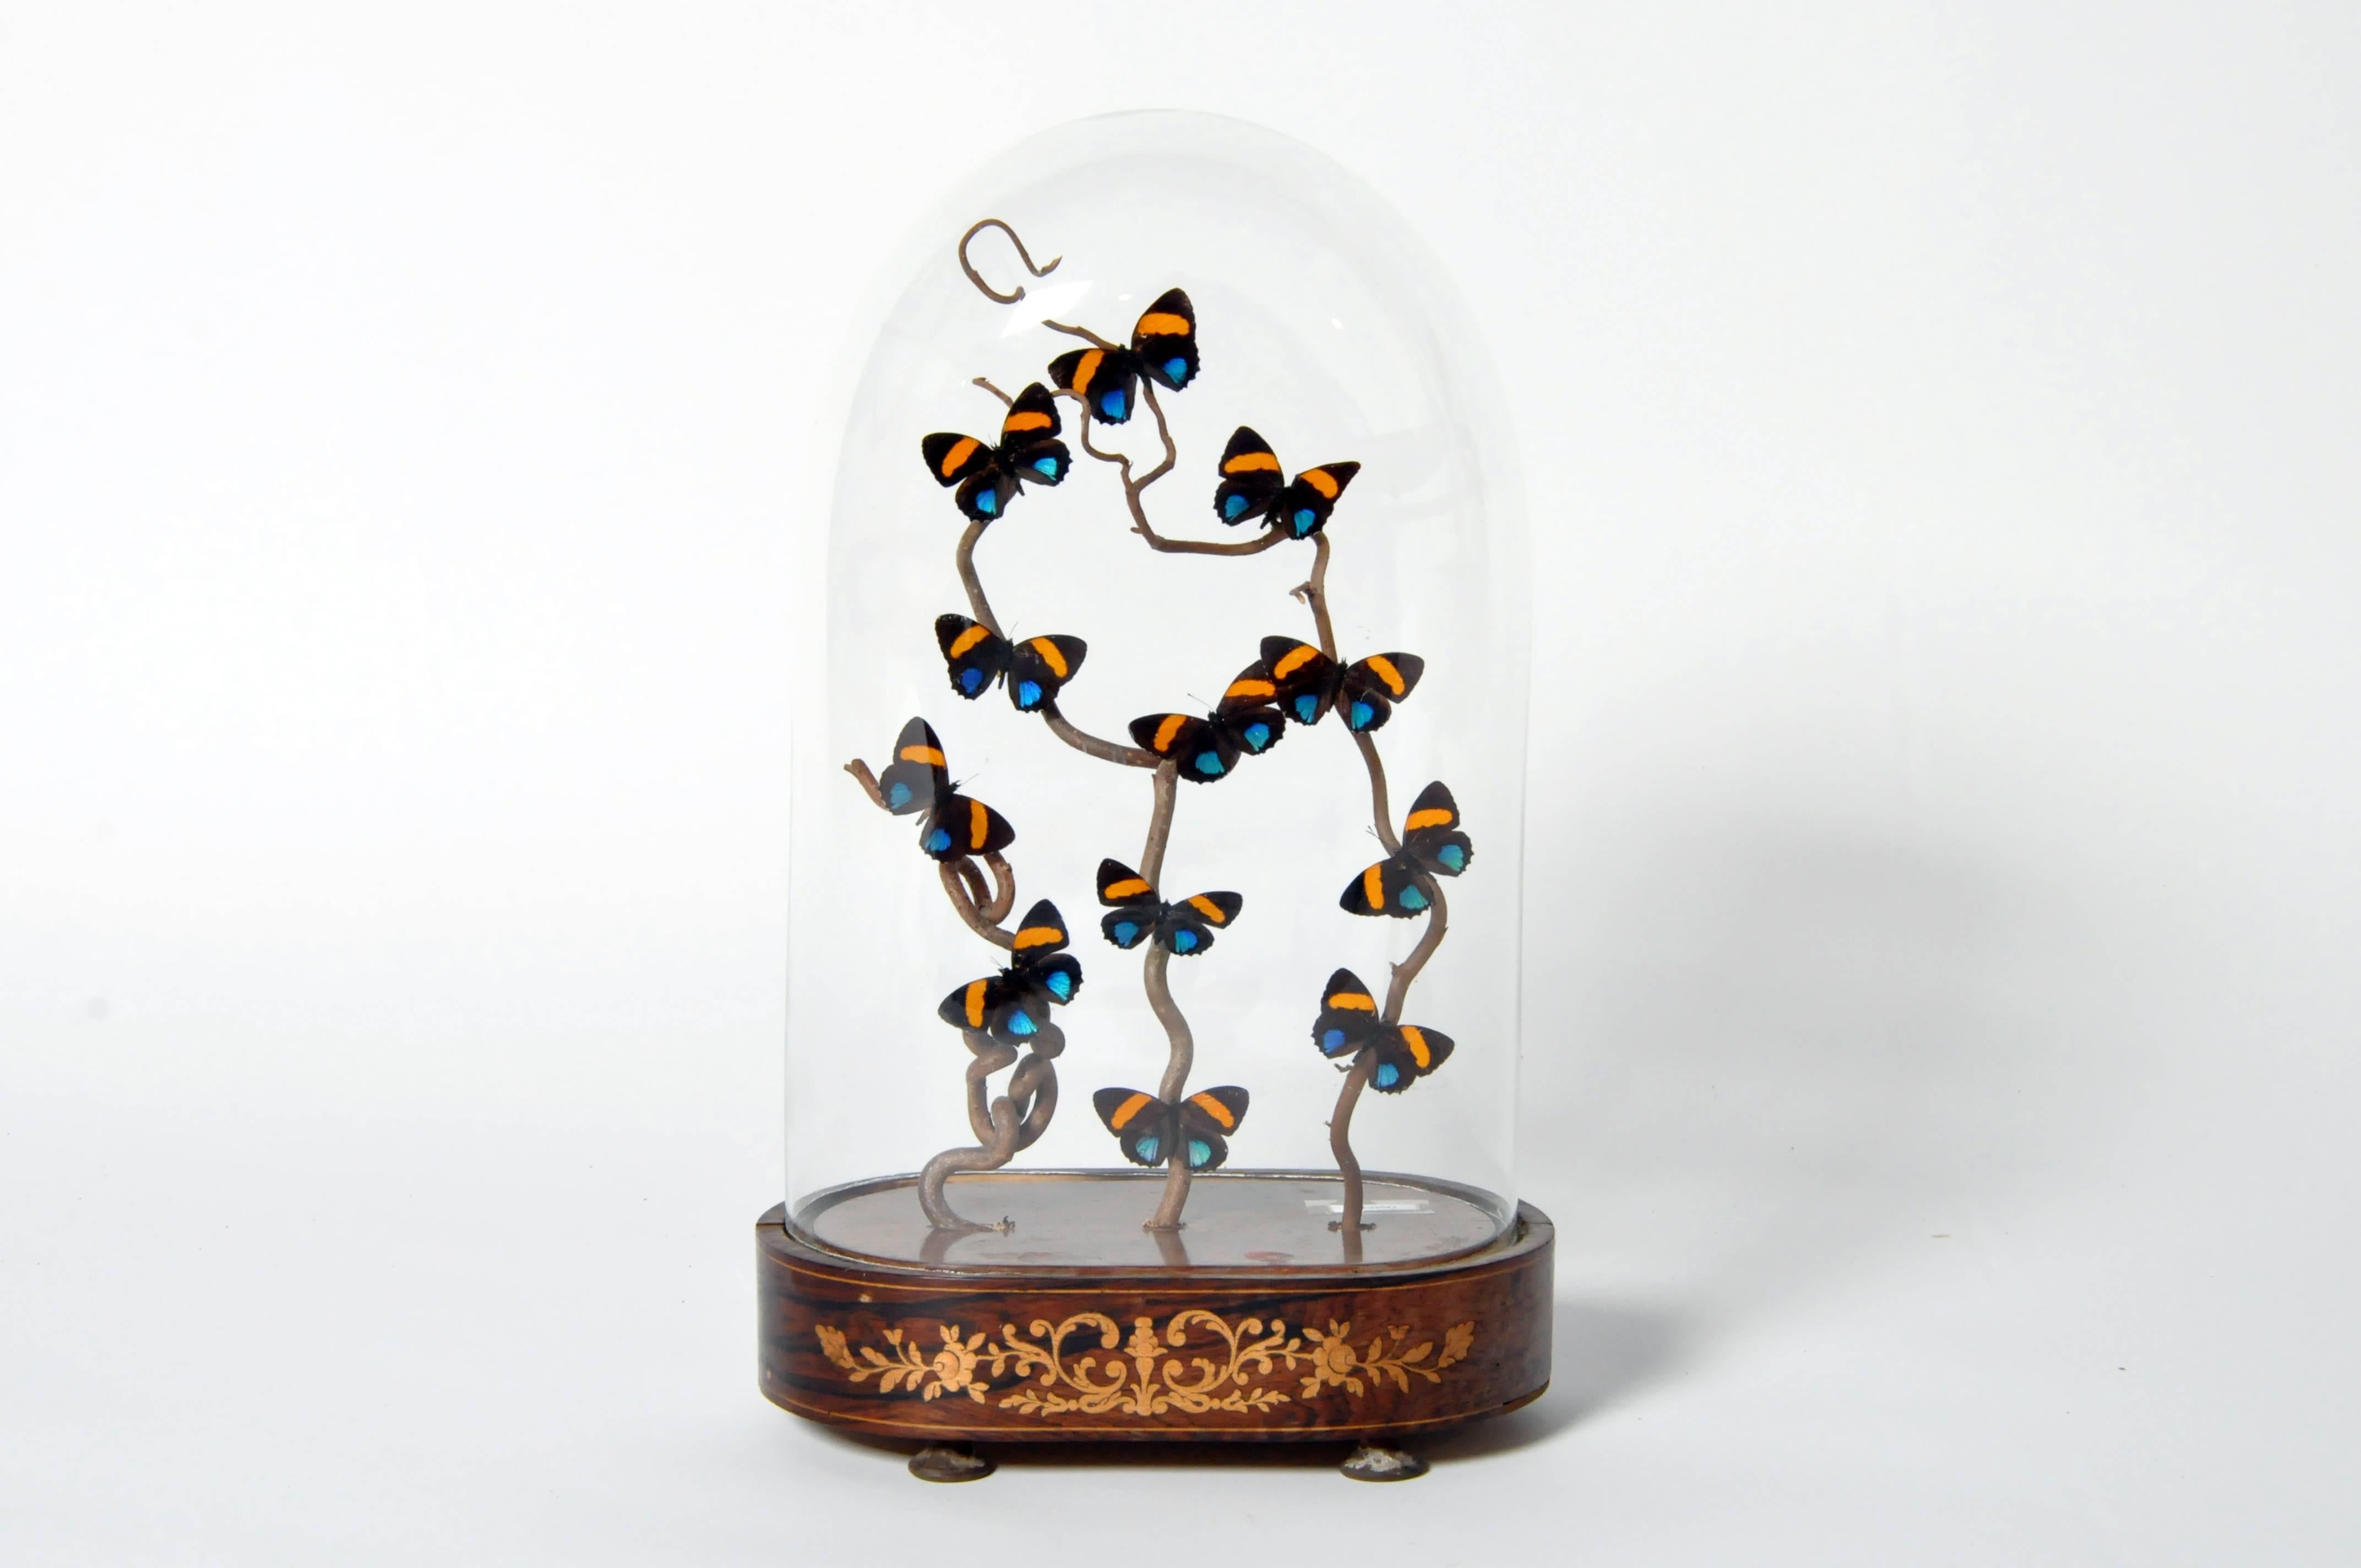 This decorative cloche is from France and features a beautiful butterfly display.
Add a unique and elegant burst of color to any room with this stunning butterfly dome. Extending up from the wood base, the specimens rest on twigs, preserved in a